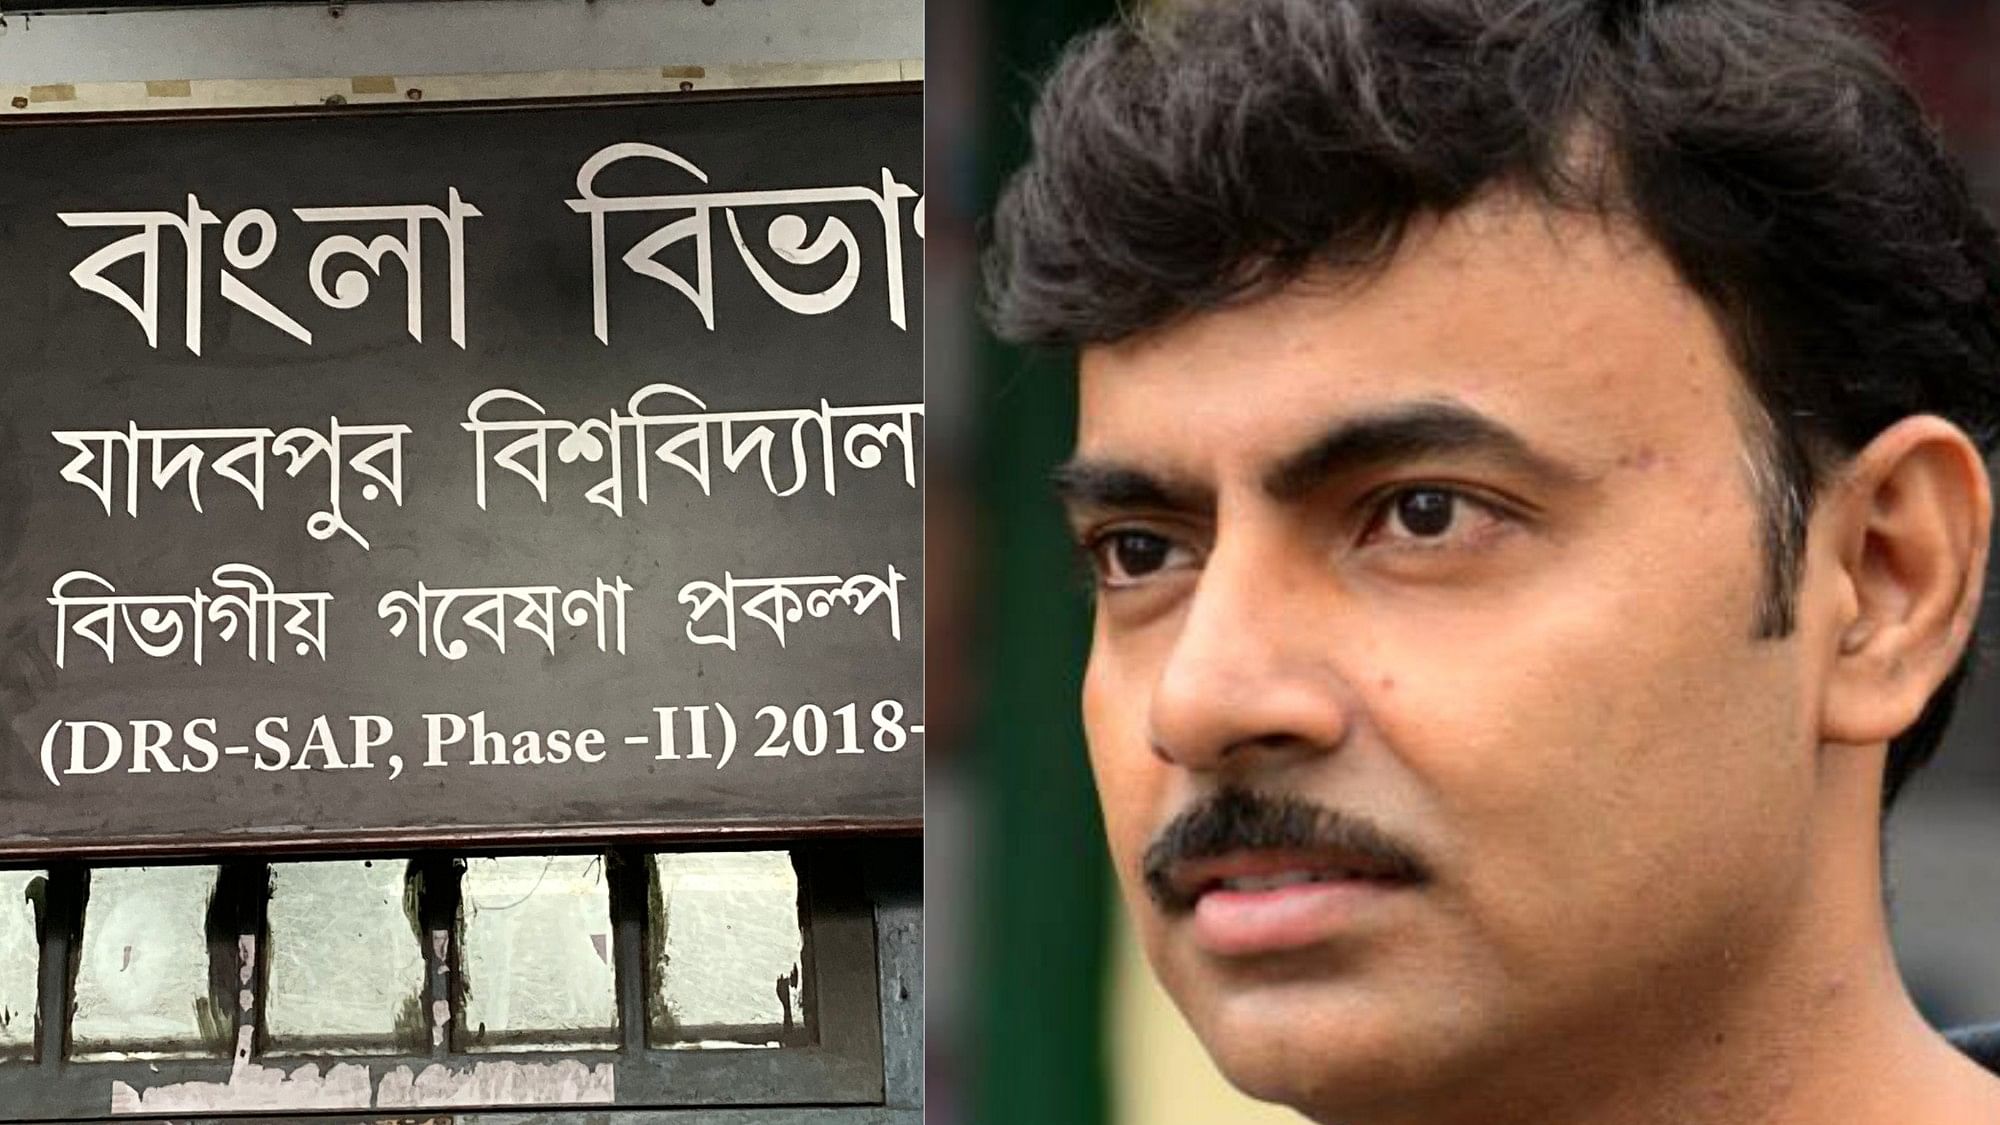 <div class="paragraphs"><p>'I remember him standing up on the day of the orientation to introduce himself and tell everybody which books he liked to read," Joydeep Ghosh, Head of the Bengali Department at JU, told <strong>The Quint </strong>about the 17-year-old ragging victim.&nbsp;</p></div>